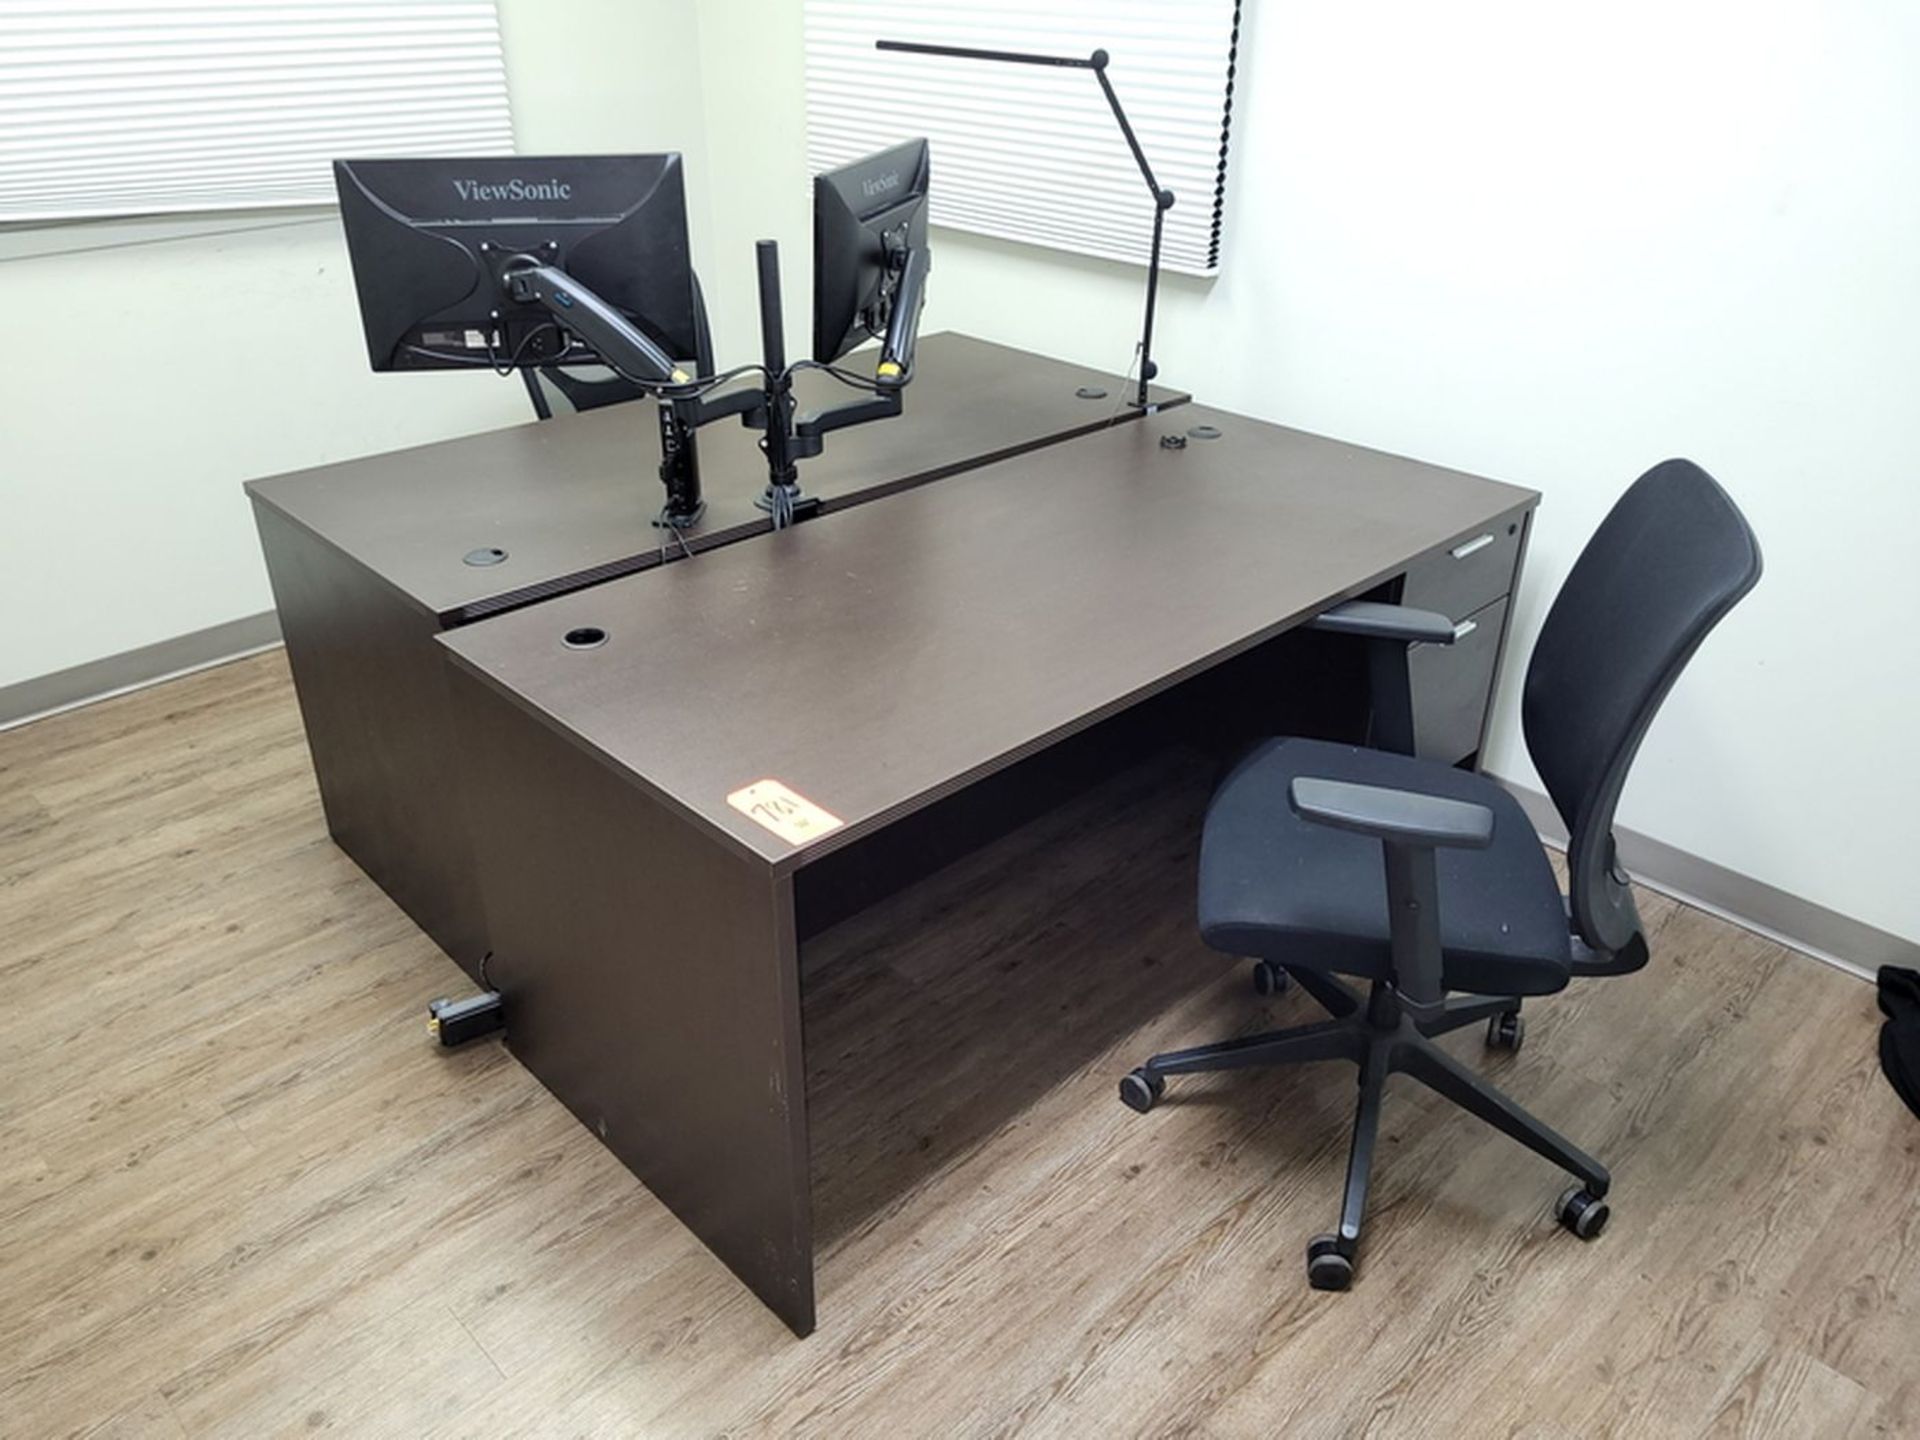 Lot - (2) Wood Desks; (2) Swivel Chairs, (1) Desk Includes Dual Monitors and Stand - Image 2 of 2